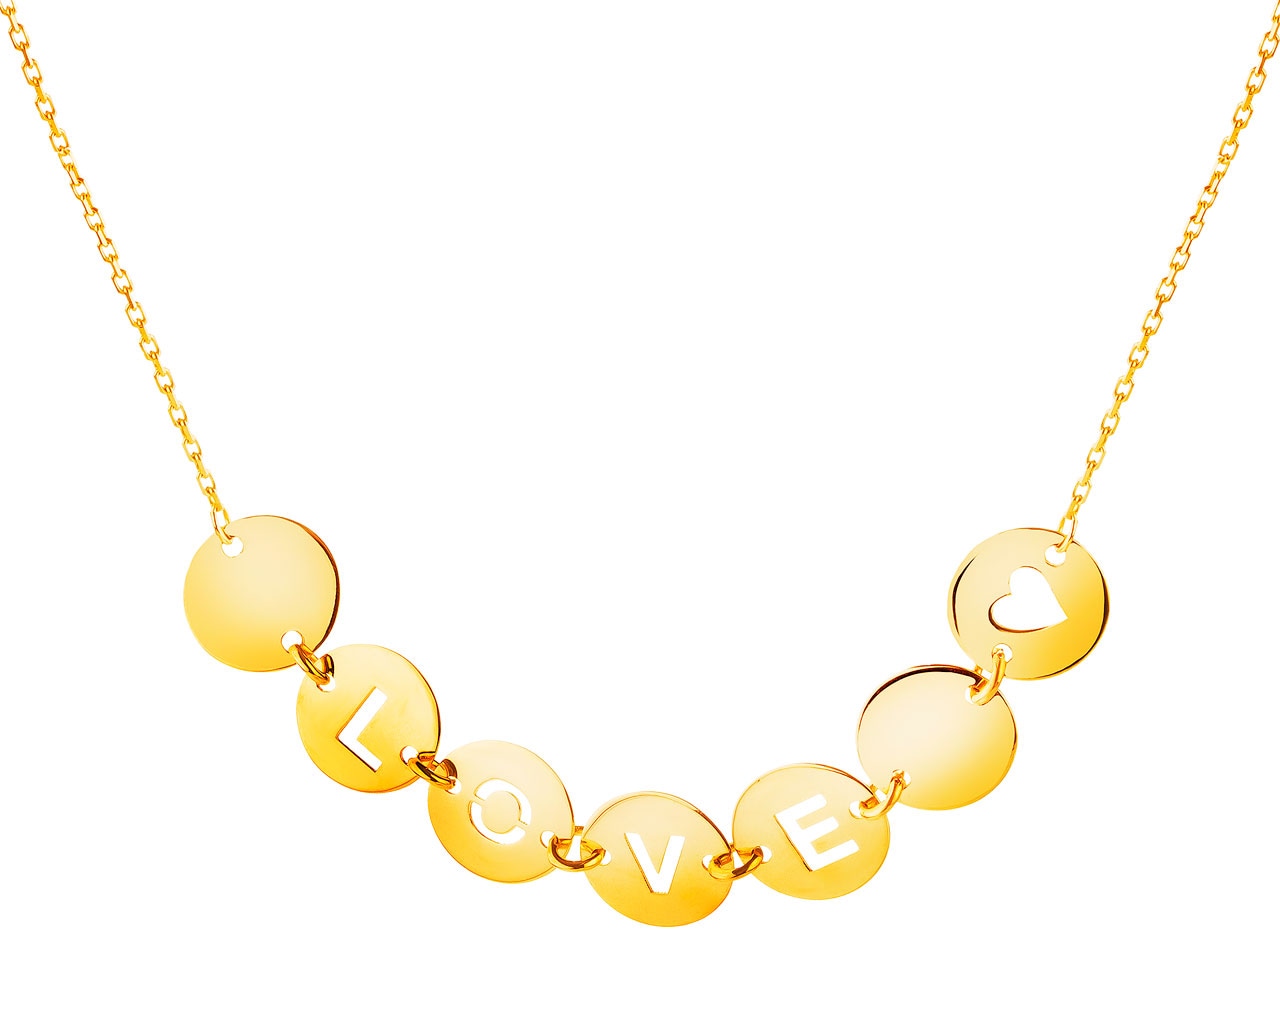 18 K Yellow Gold Necklace 